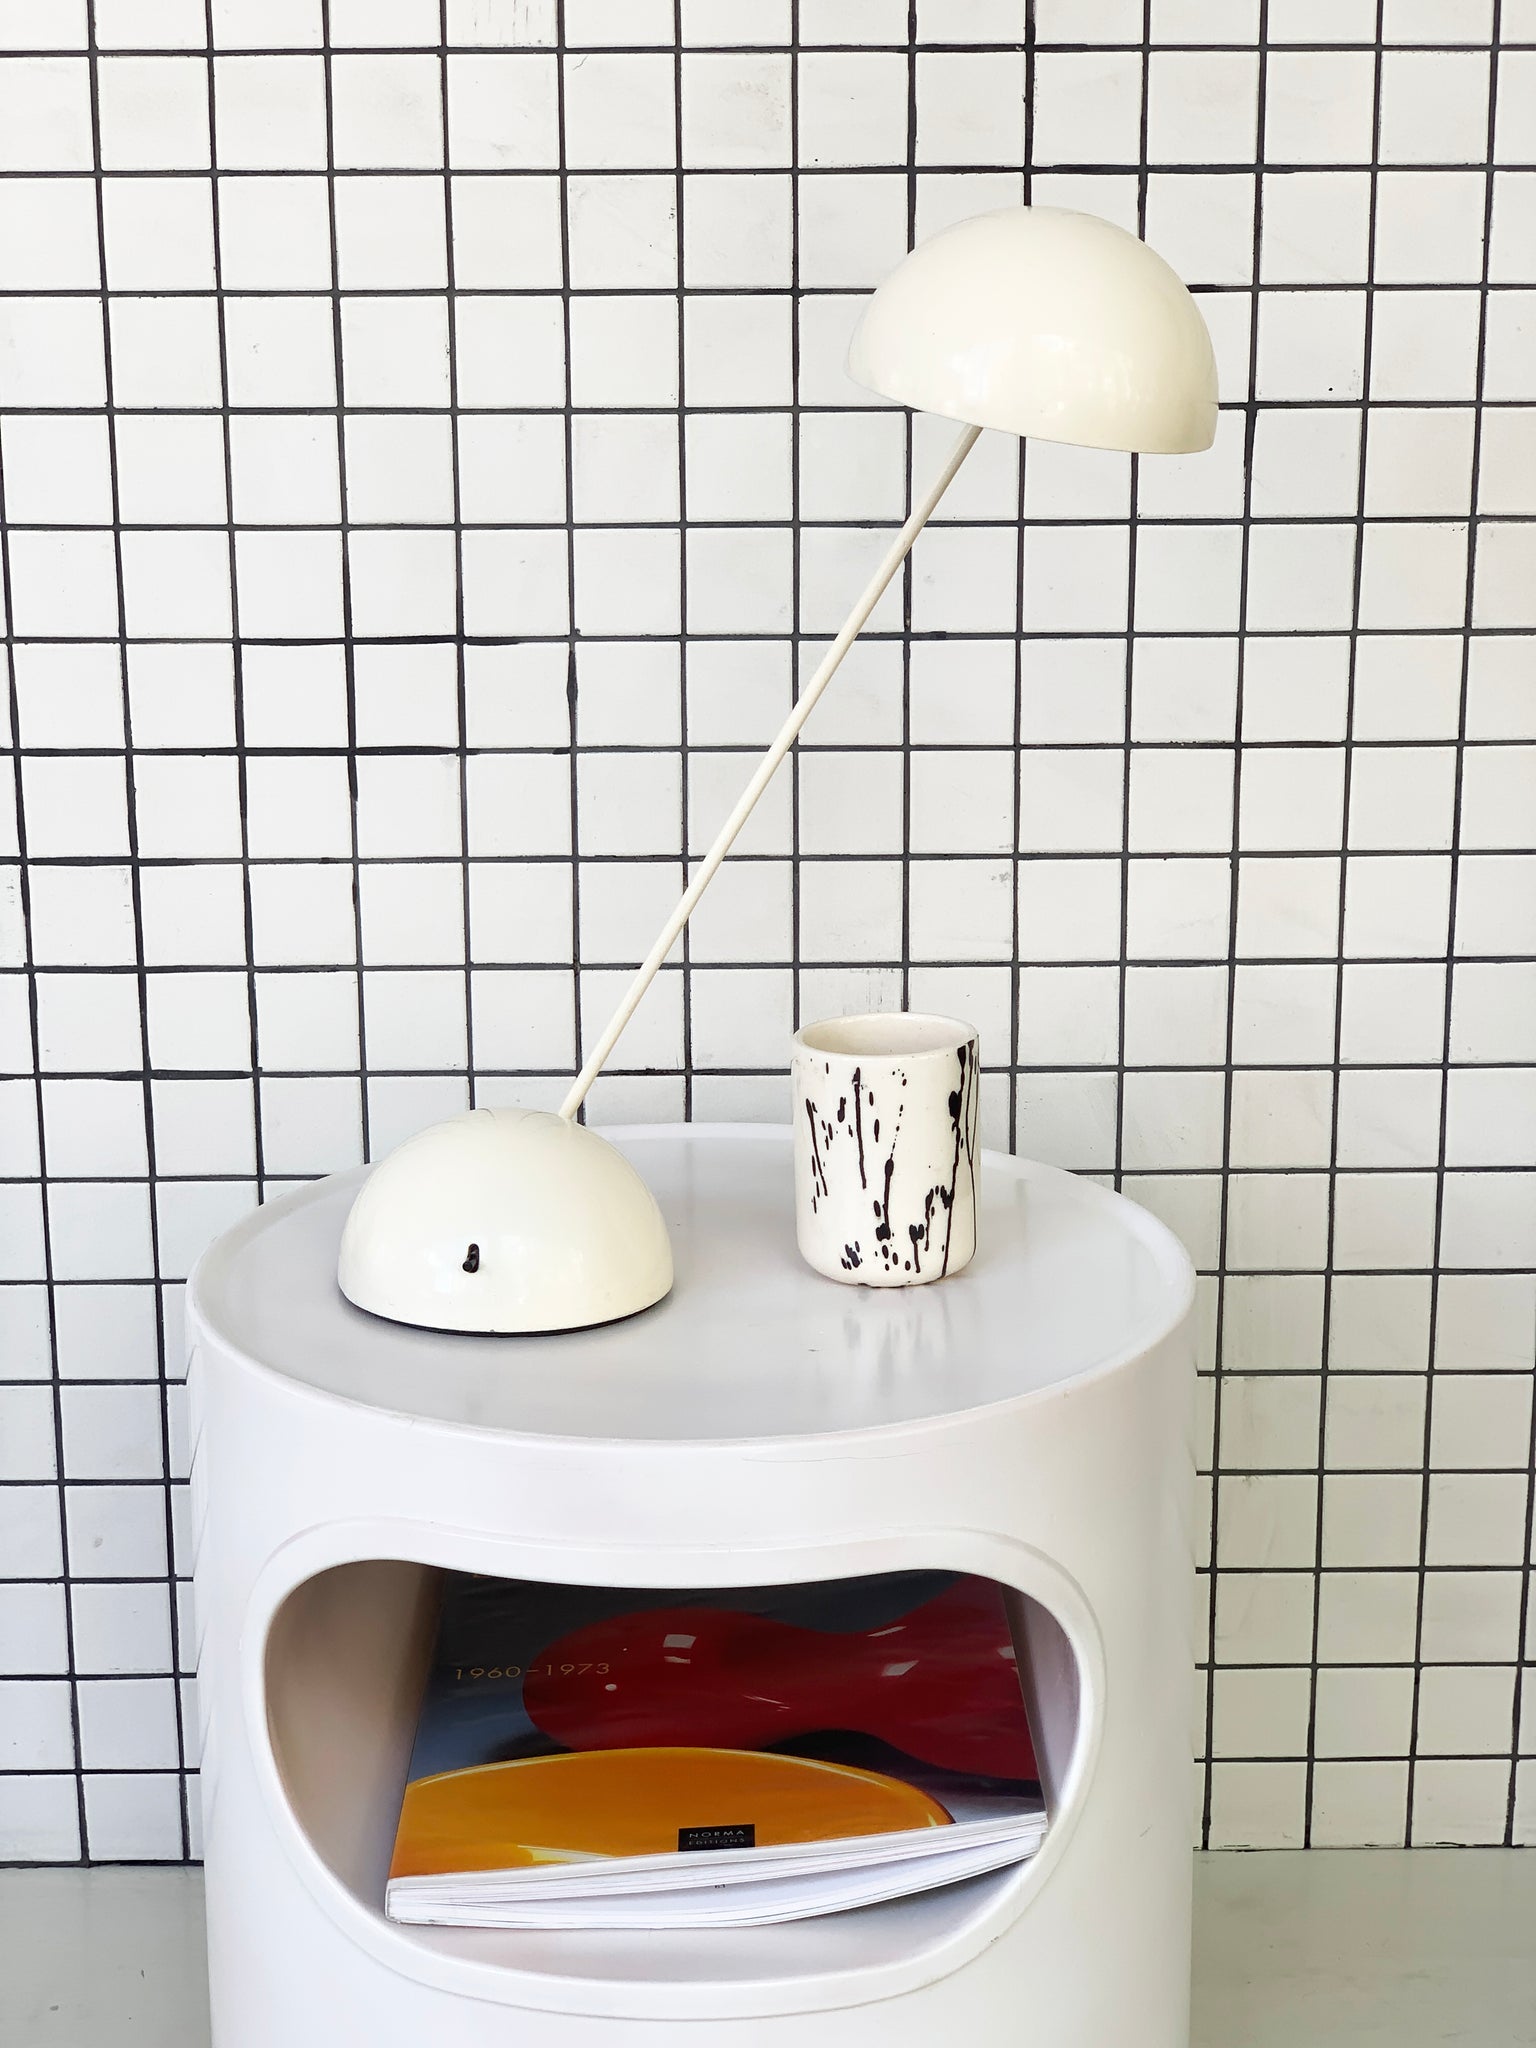 1960s Giano-Giano-Vano White Bedside Table Designed by Emma Gismondi Schweinberger for Artemide